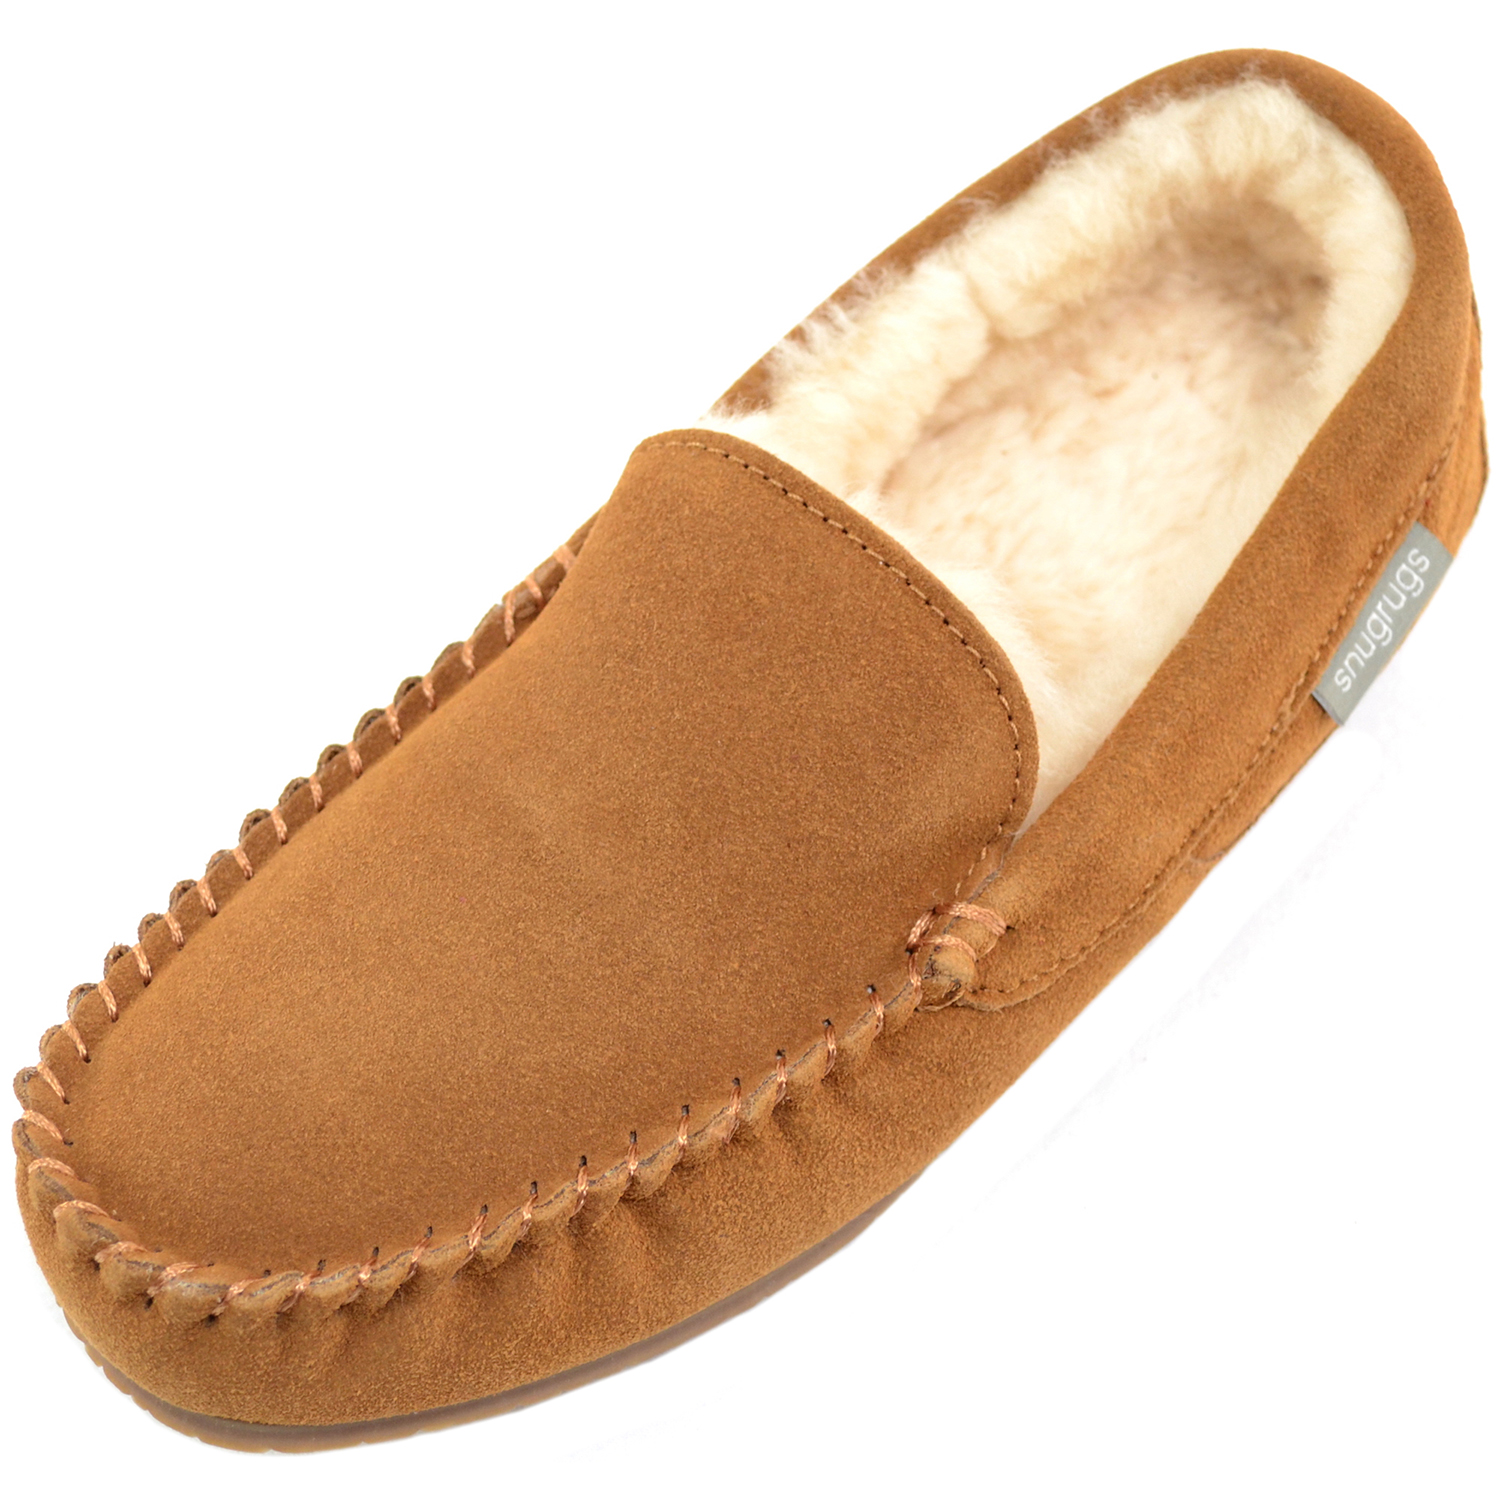 mens suede slippers